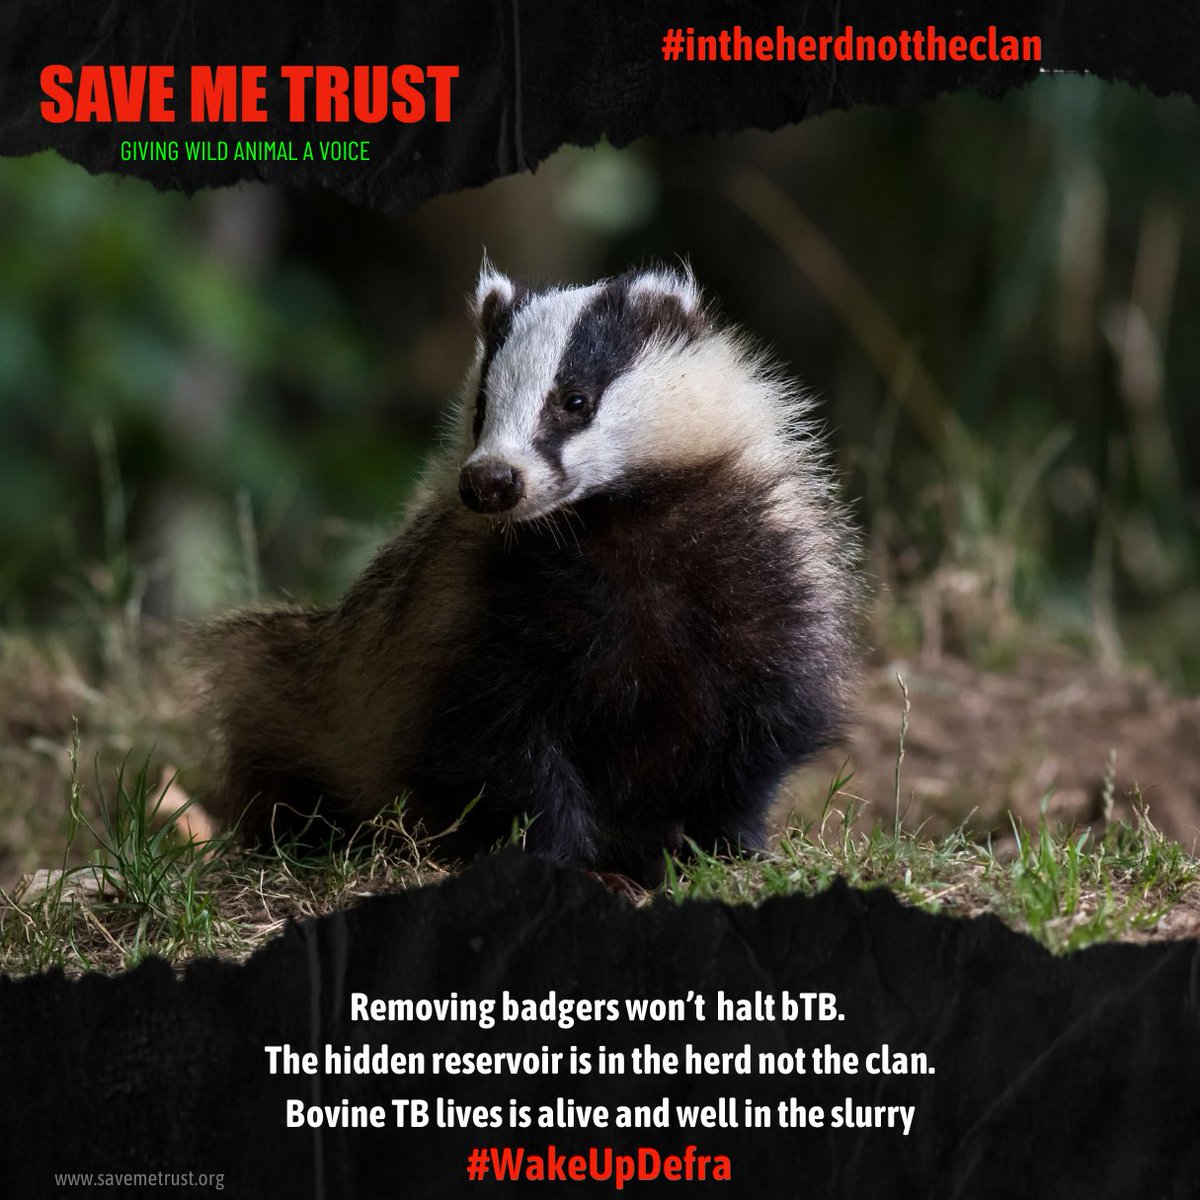 Removing badgers won't halt bTB. The hidden reservoir is in the herd not the clan. Bovine TB lives is alive and well in the slurry #WakeUpDefra savemetrust.co.uk/2019/12/05/the…